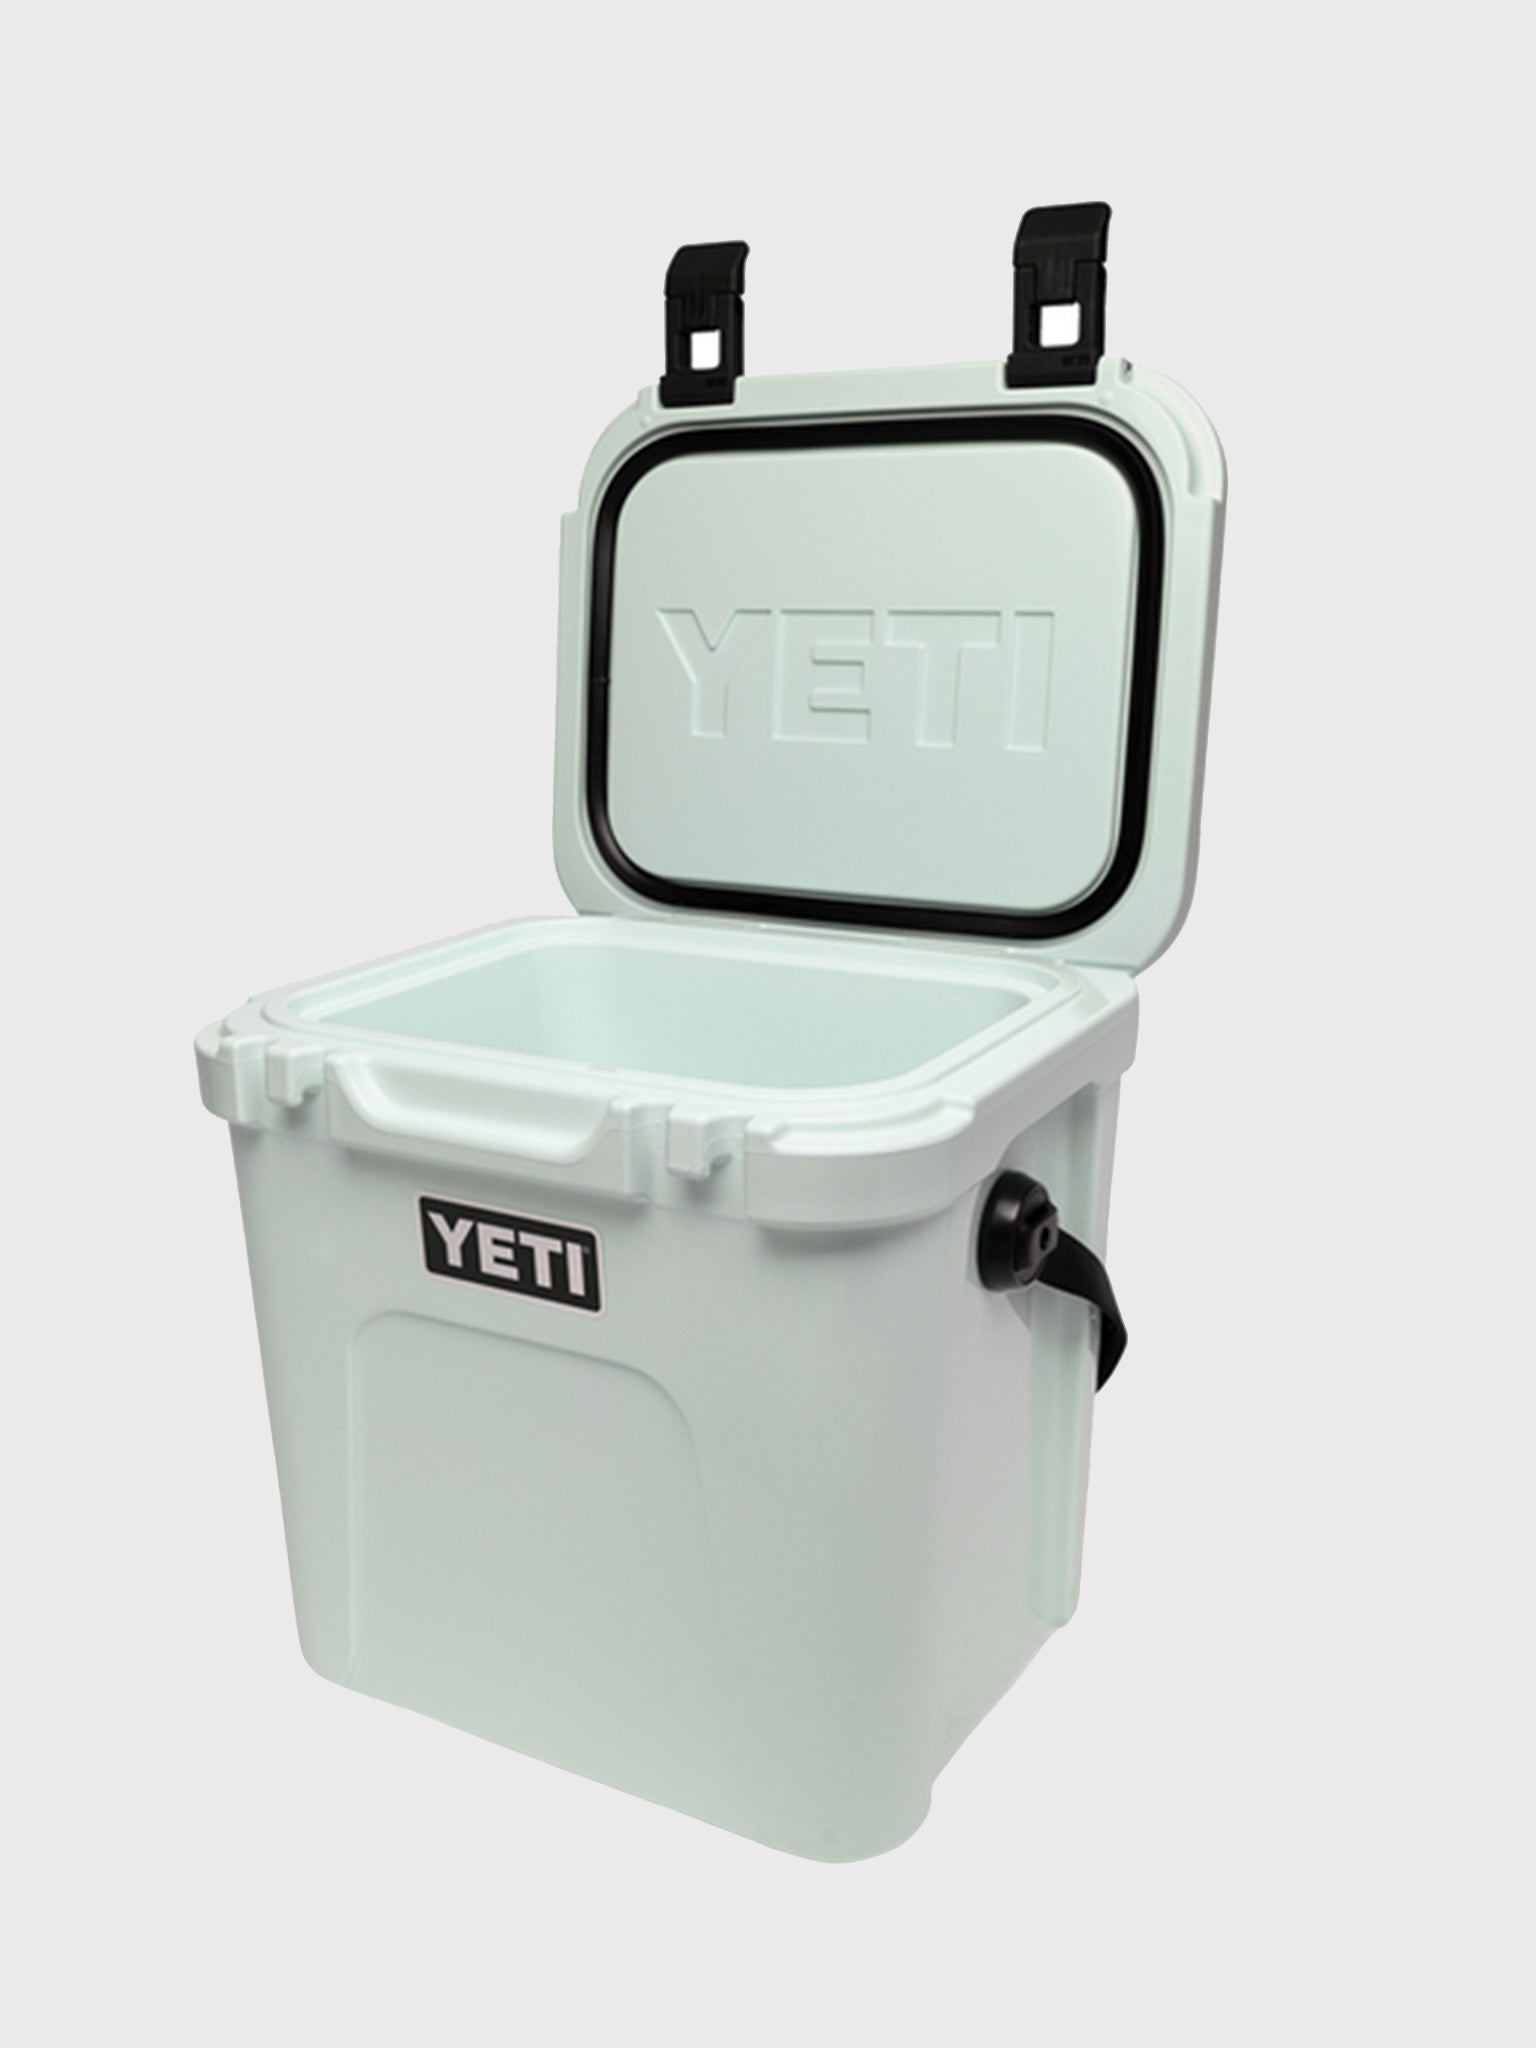 Yeti will open in Southlake Town Square